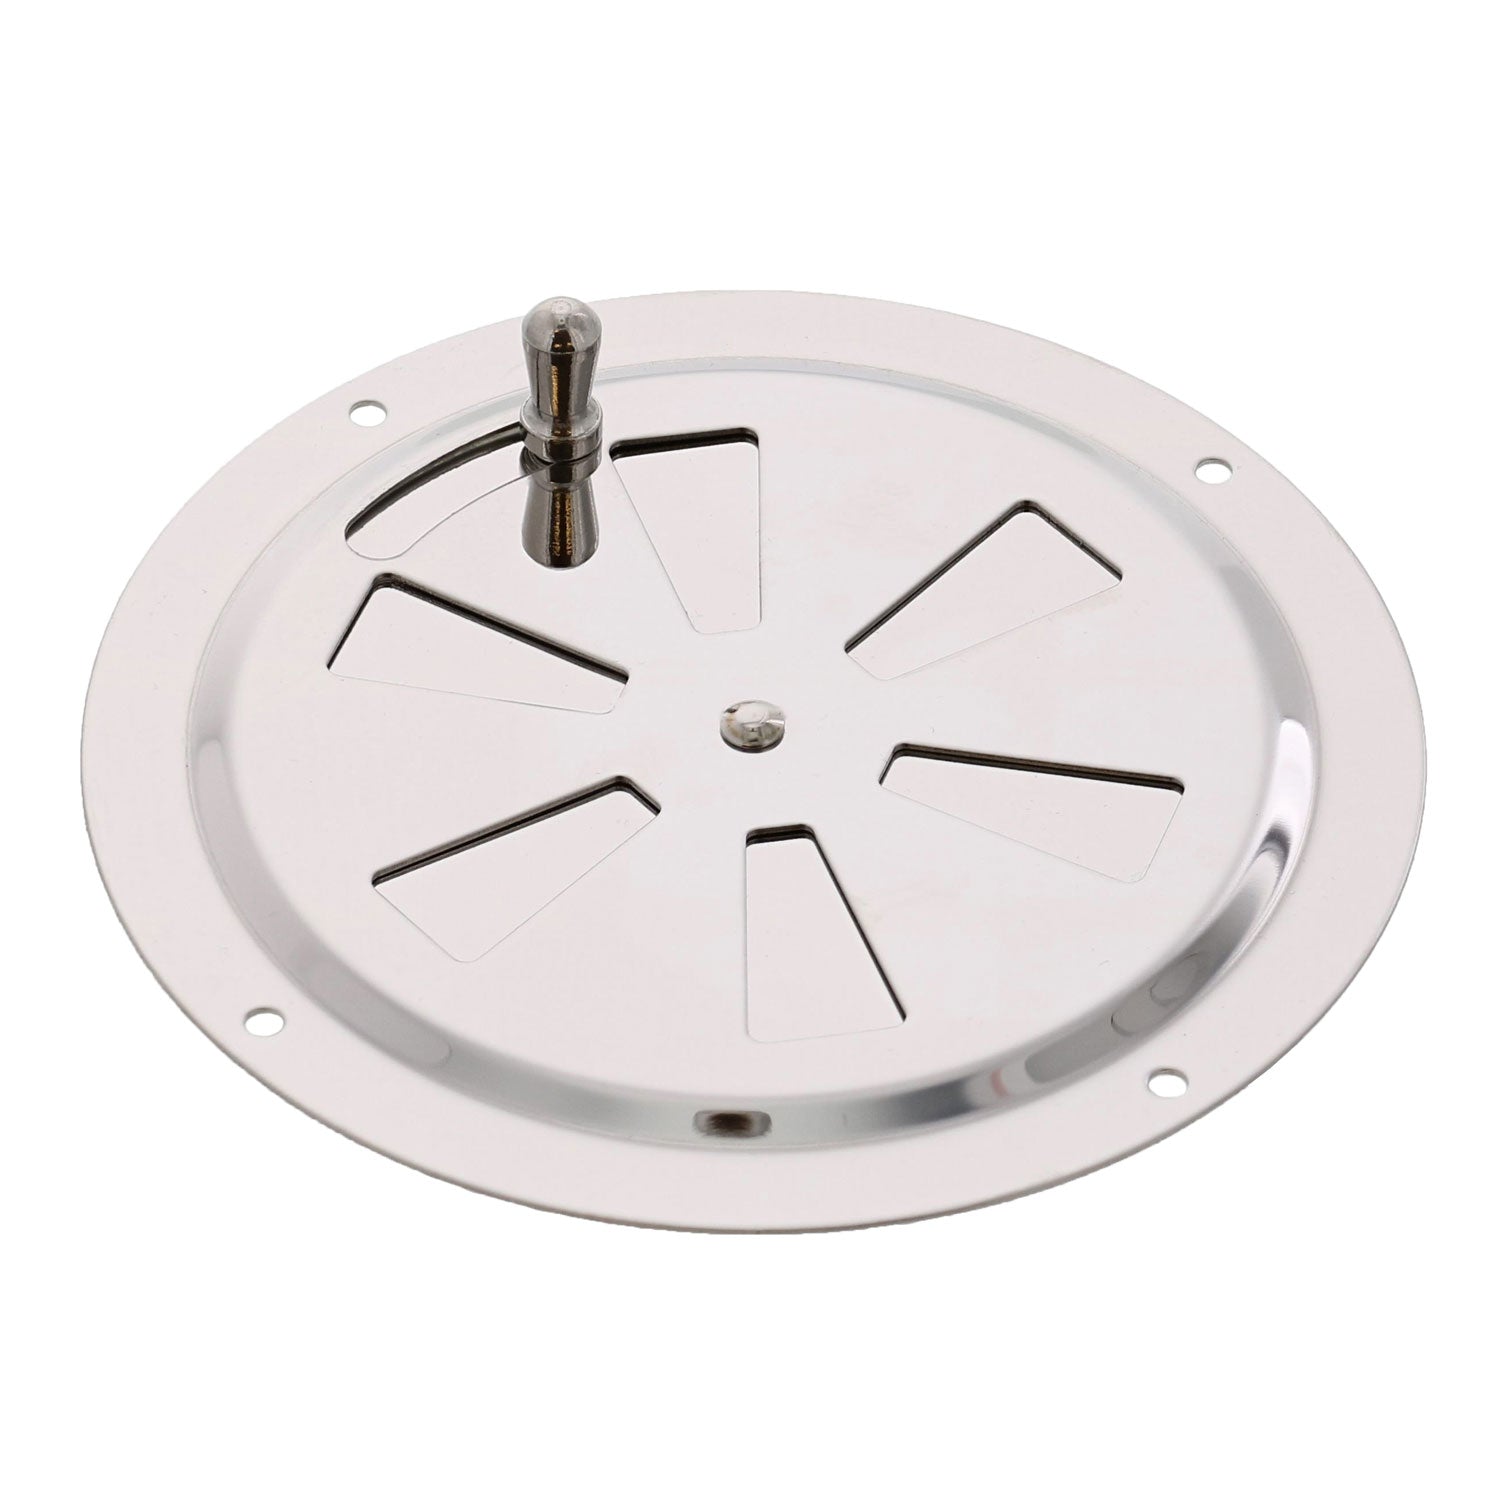 Stainless Steel Round Lockable Vent Plate, Style 1276